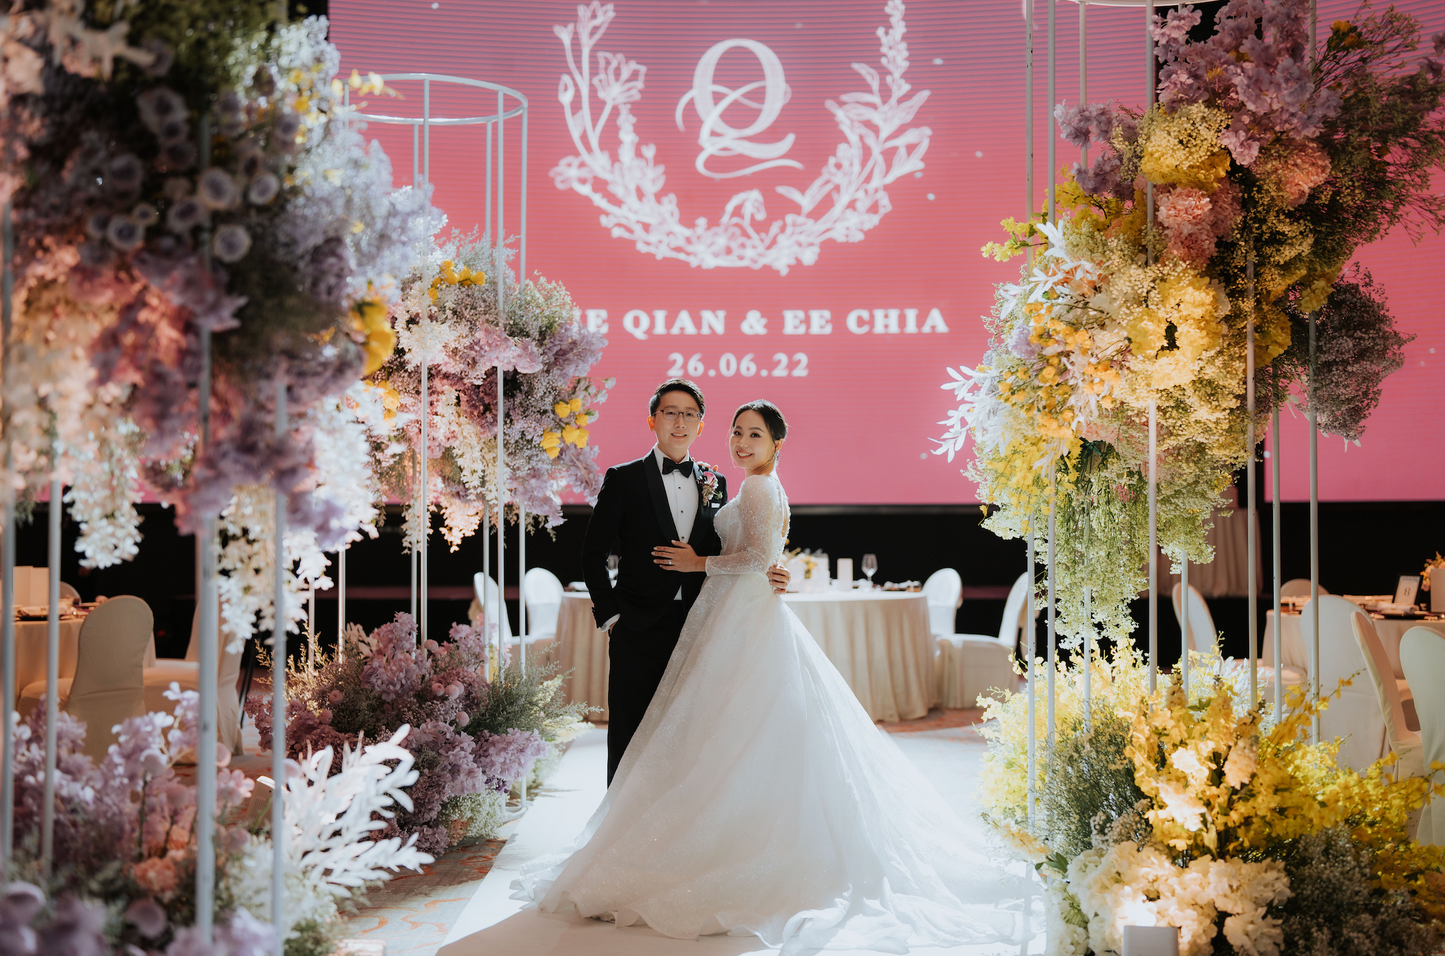 Xue Qian & Ee Chia (decor entry at)